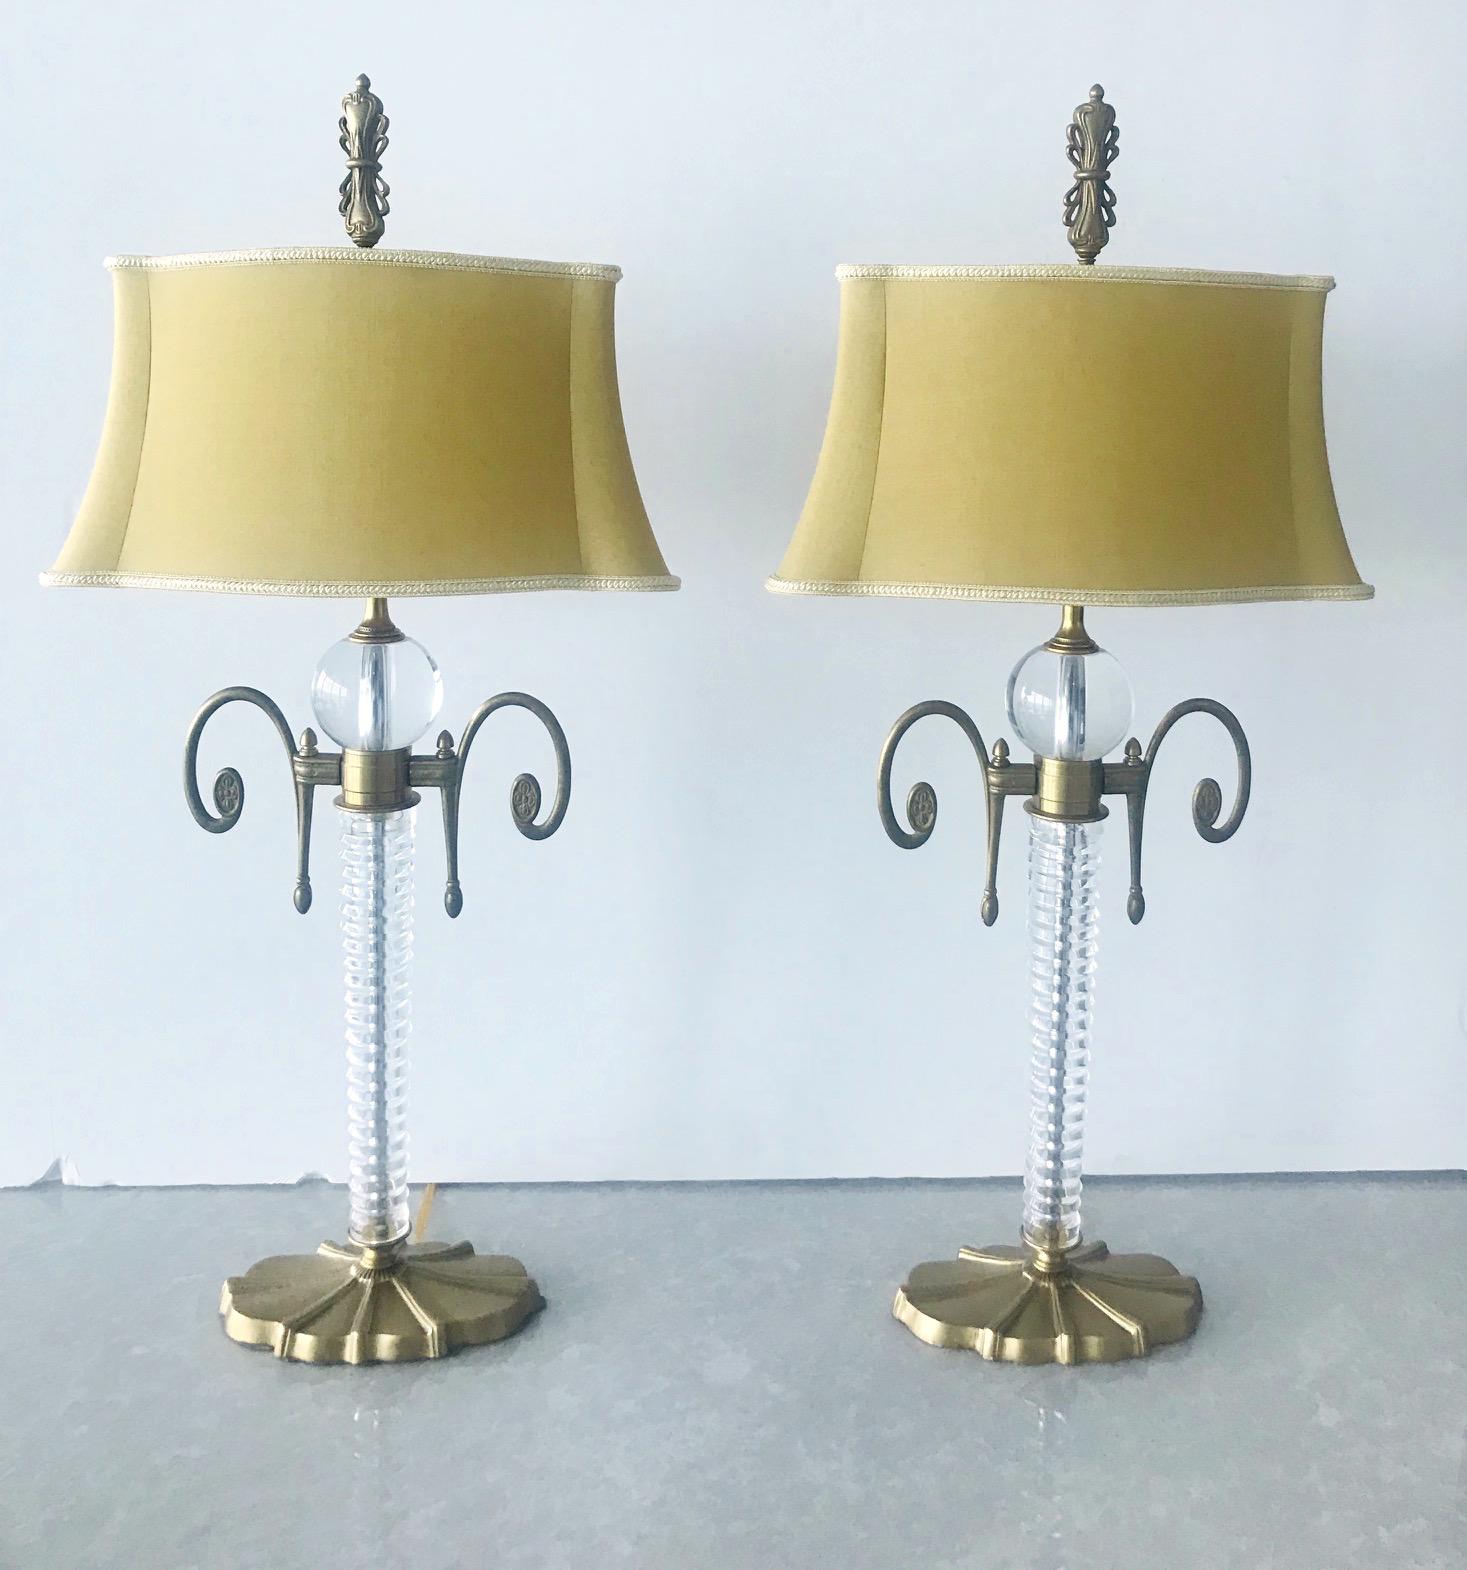 Pair of elegant vintage Art Deco lamps with blown fluted glass stems and large glass ball details. The lamps have gorgeous brass scrolls and fittings with incised floral designs. The base is comprised of cast iron metal with gold leaf finish and Art